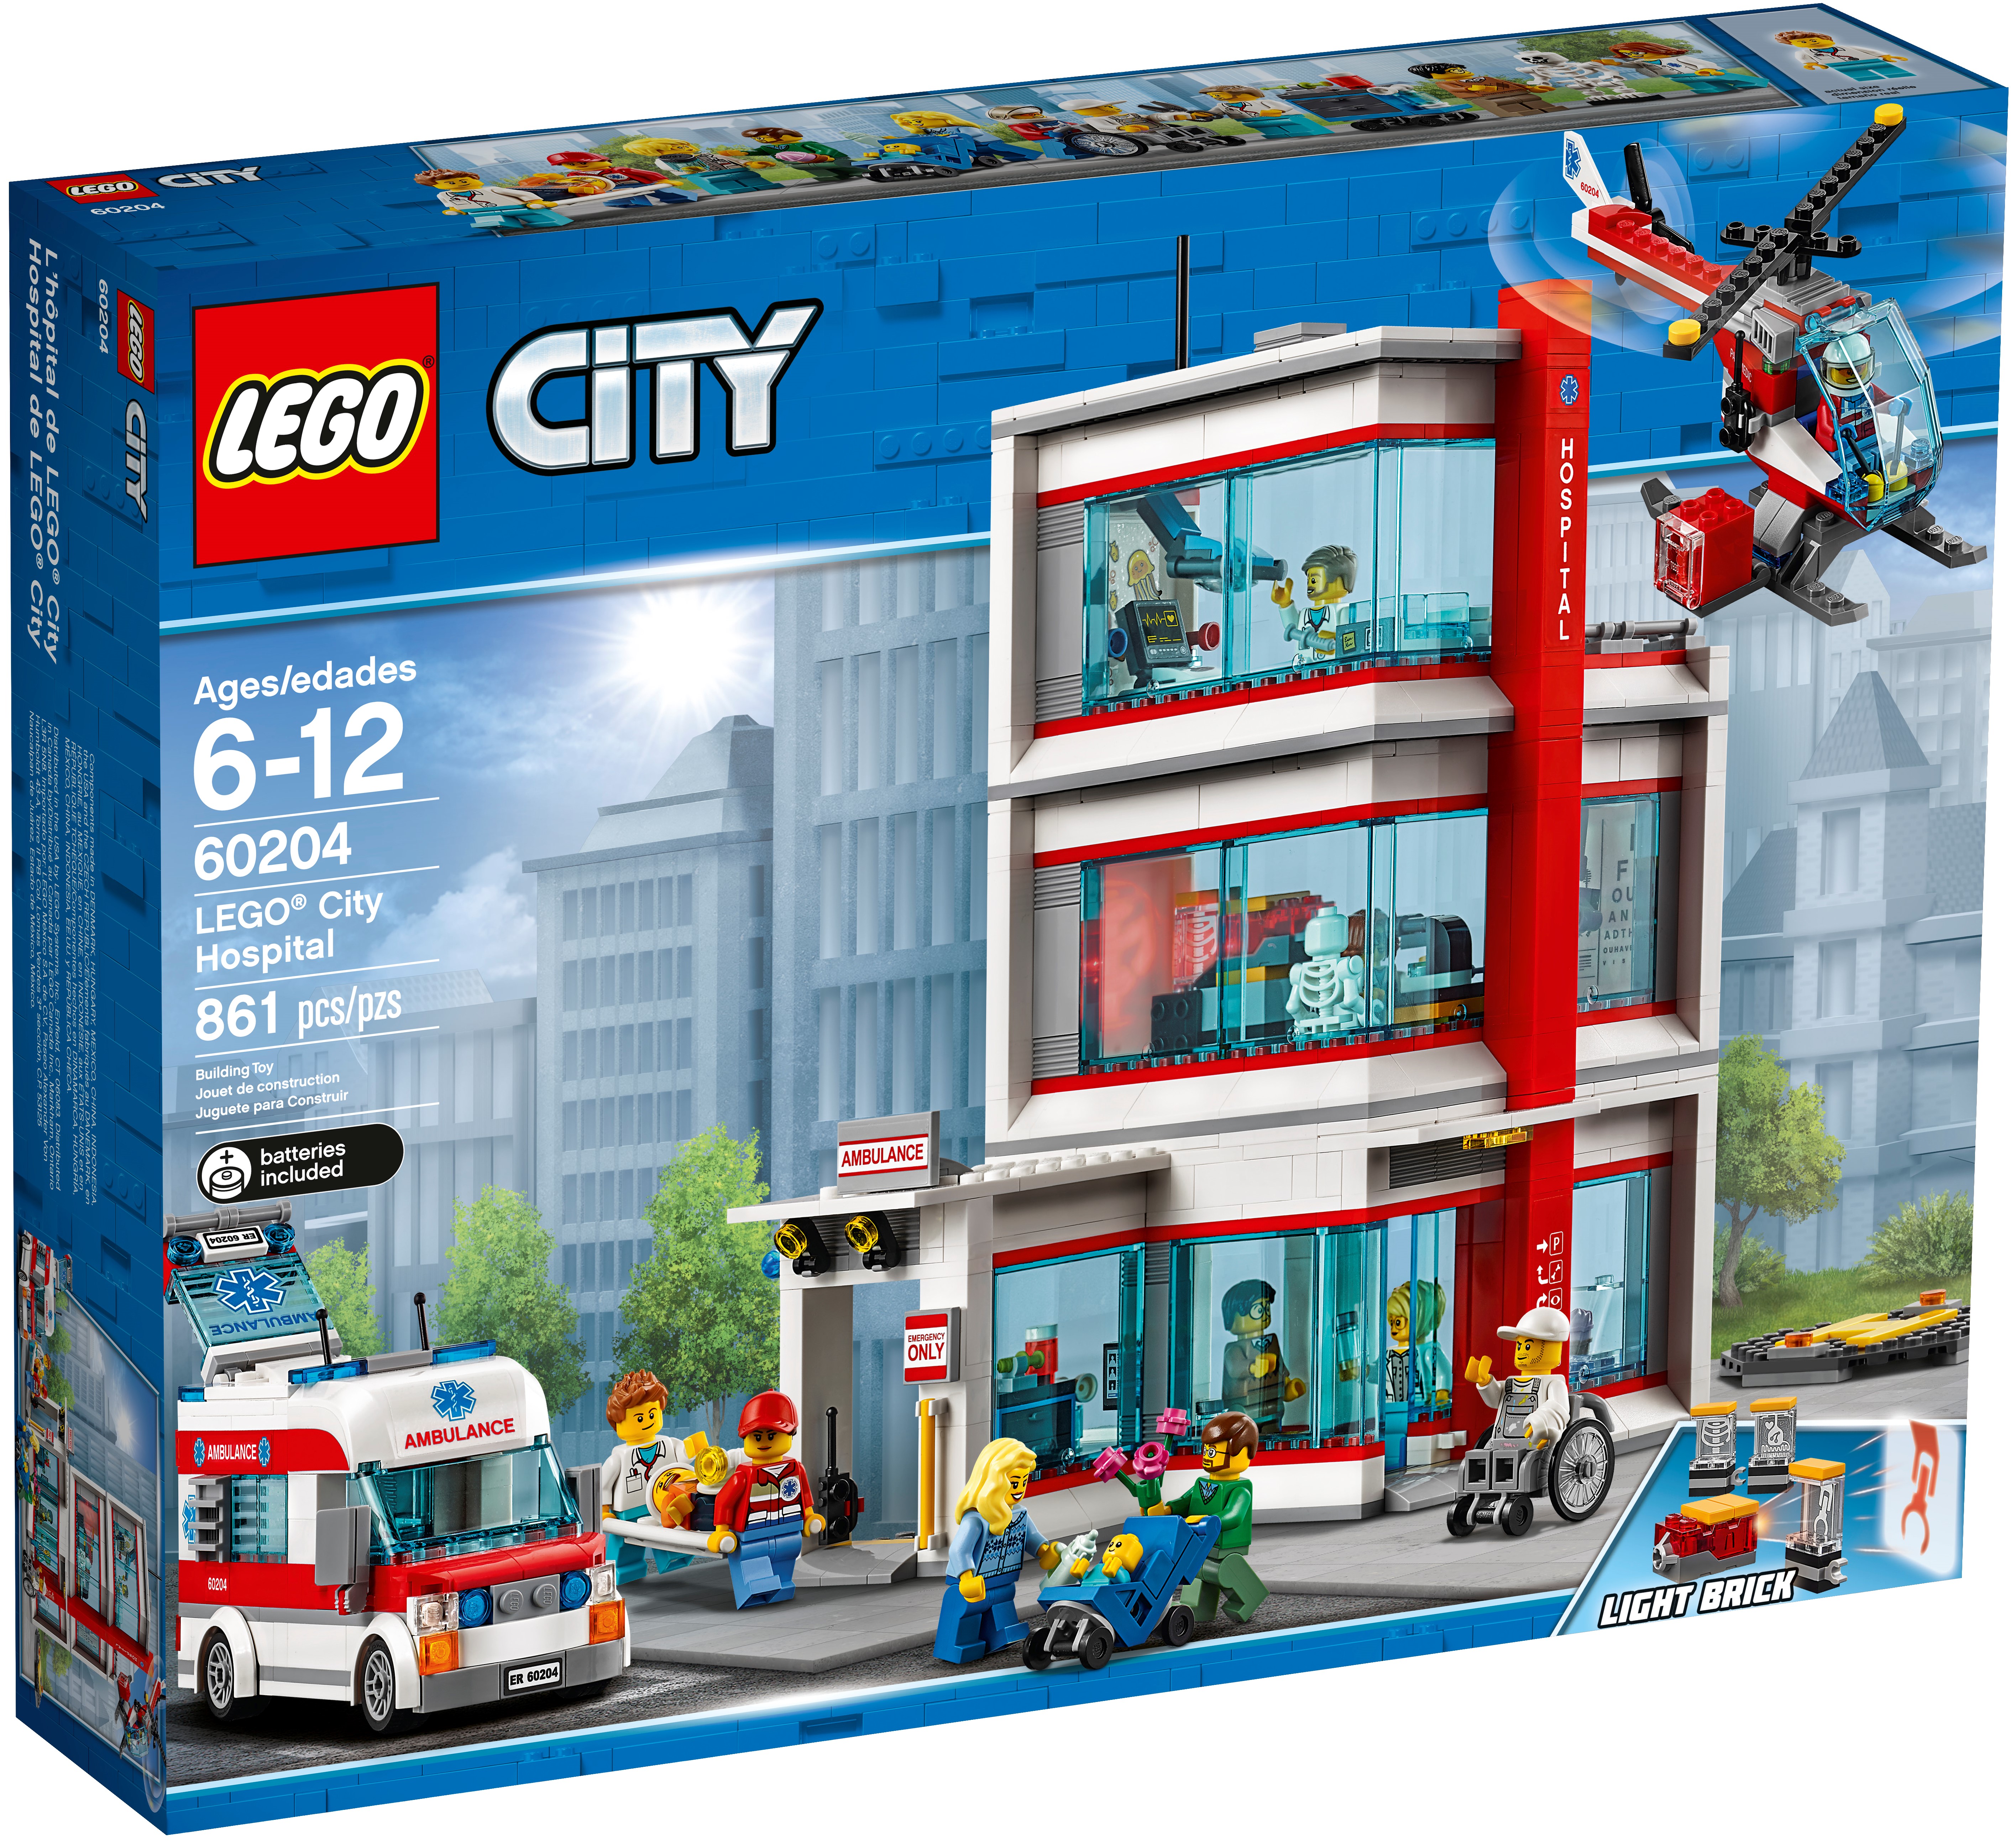 LEGO® City Hospital 60204 | City online at the Official LEGO® Shop